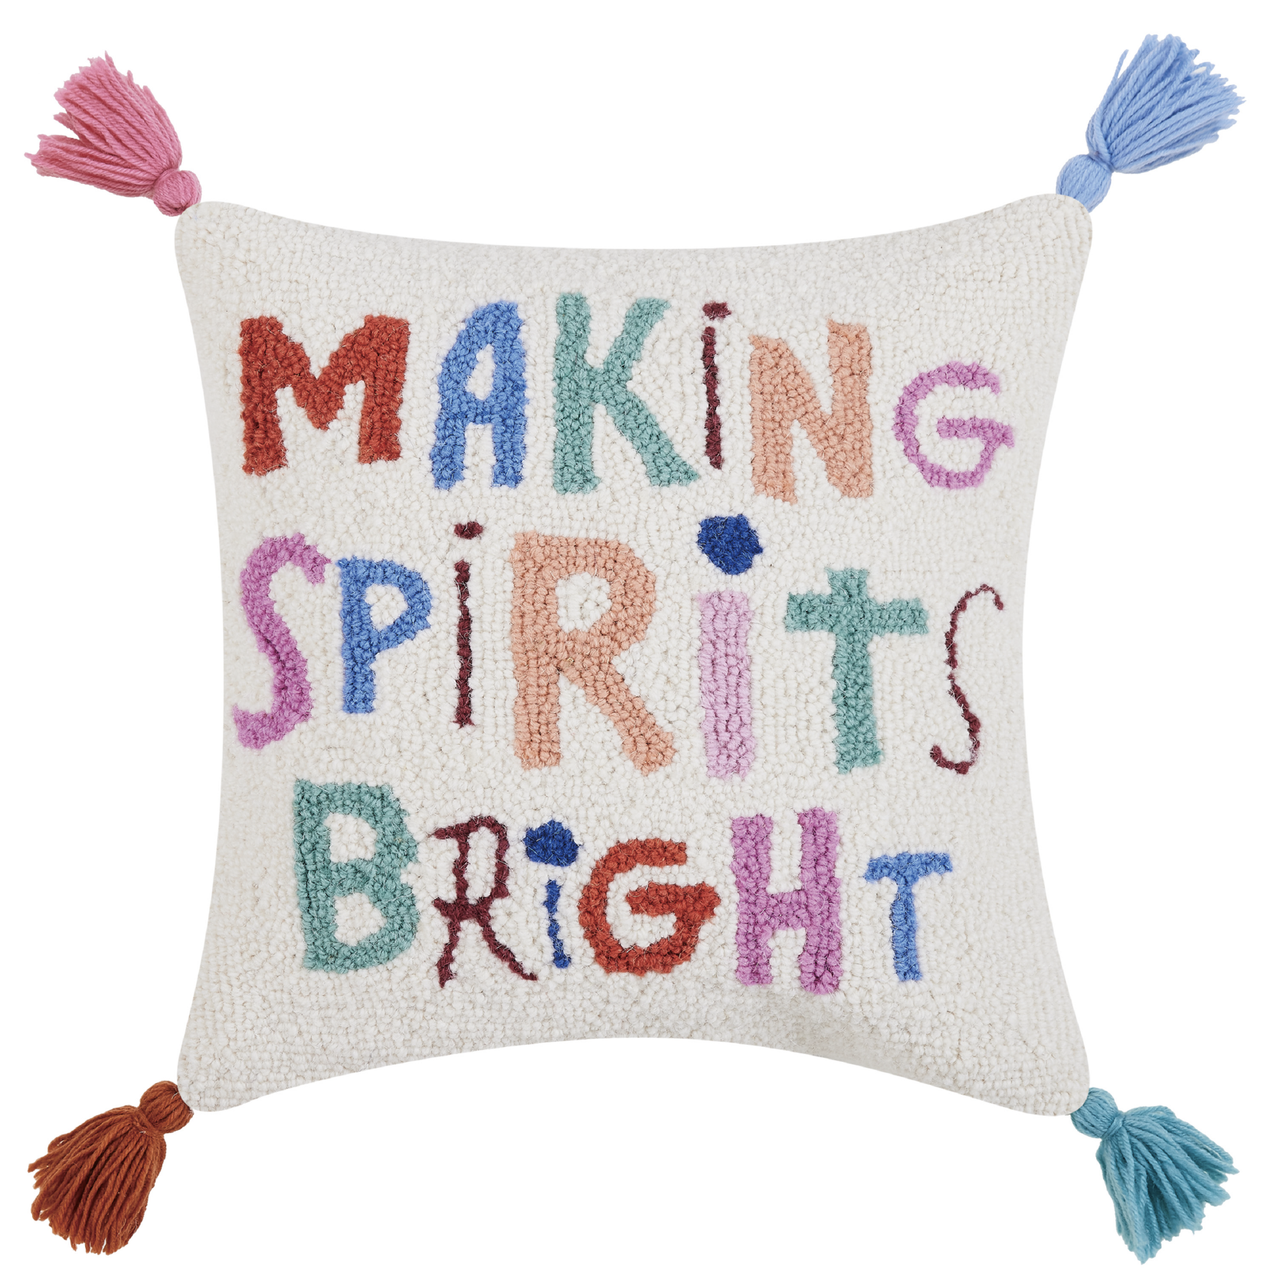 Making Spirits Bright Hook Pillow with Tassels